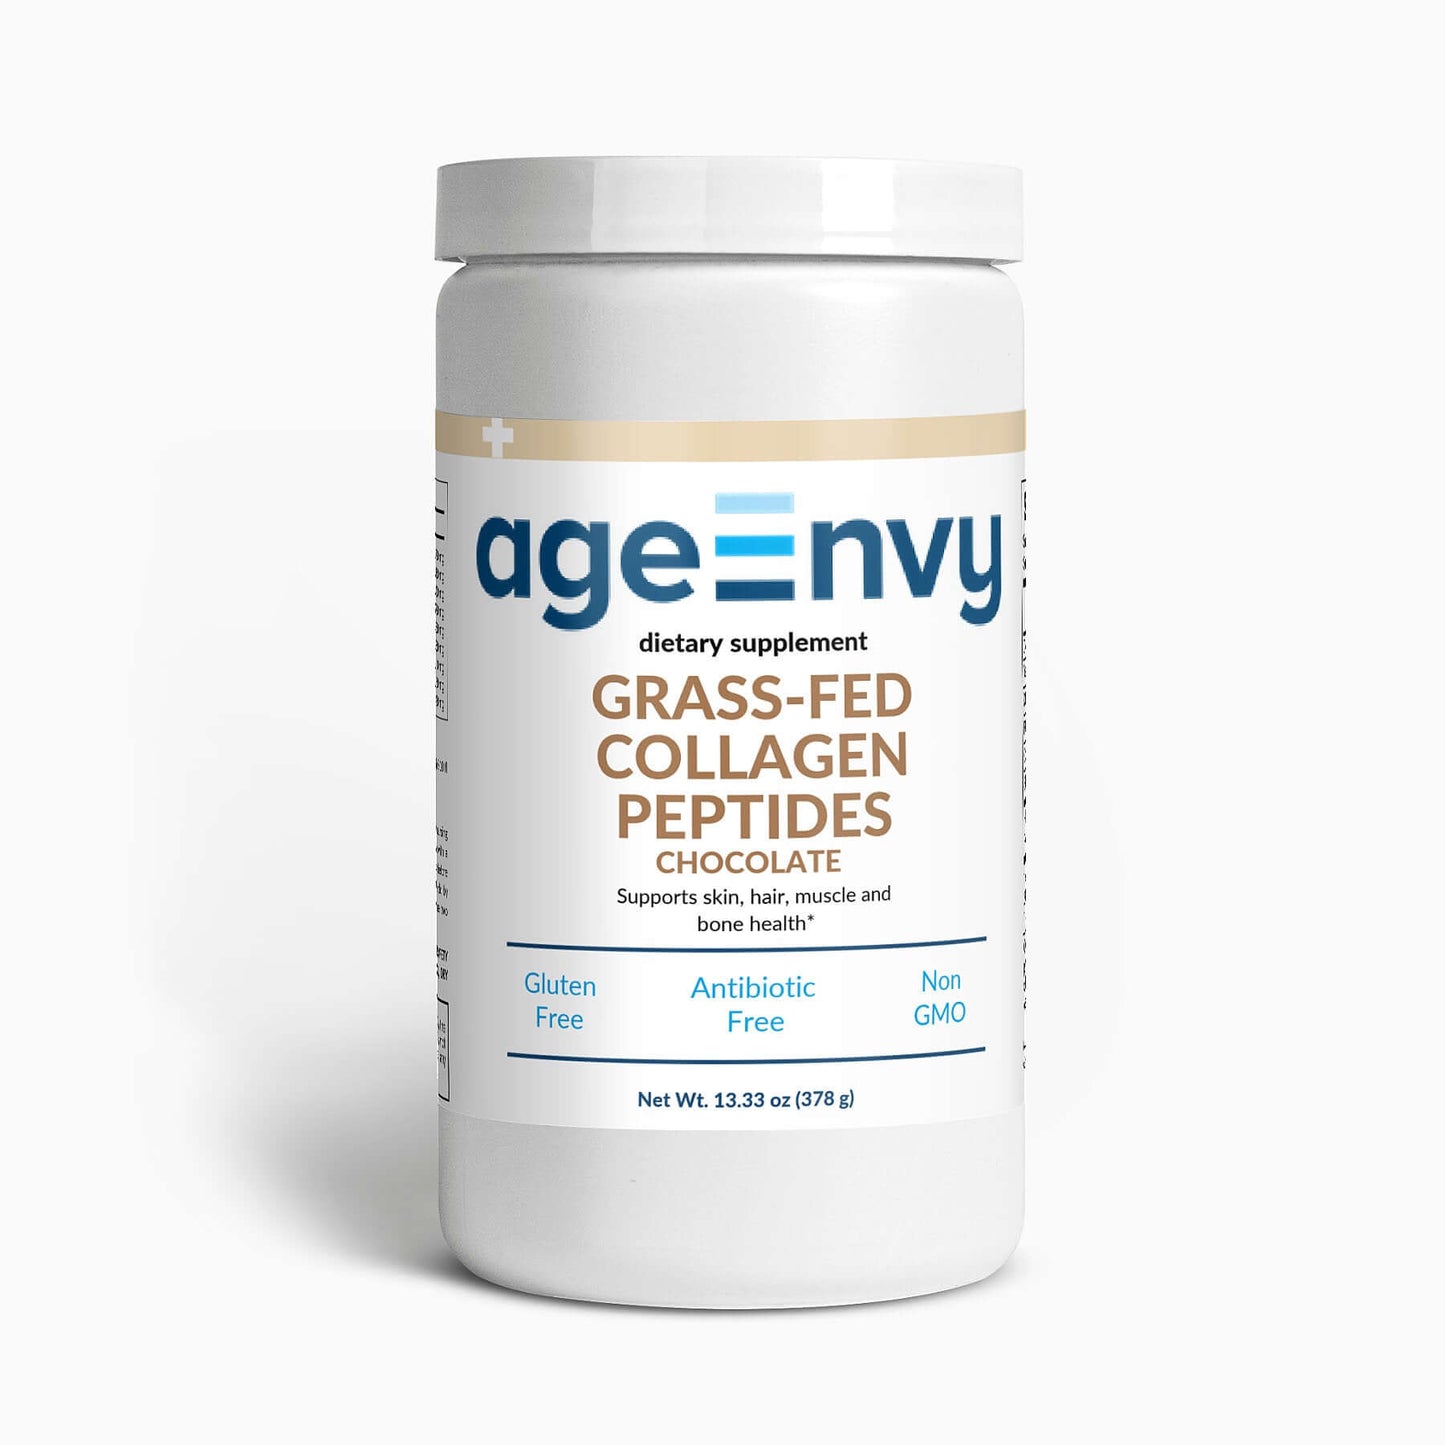 Grass-Fed Collagen Peptides (Chocolate) 378g - Natural Glow